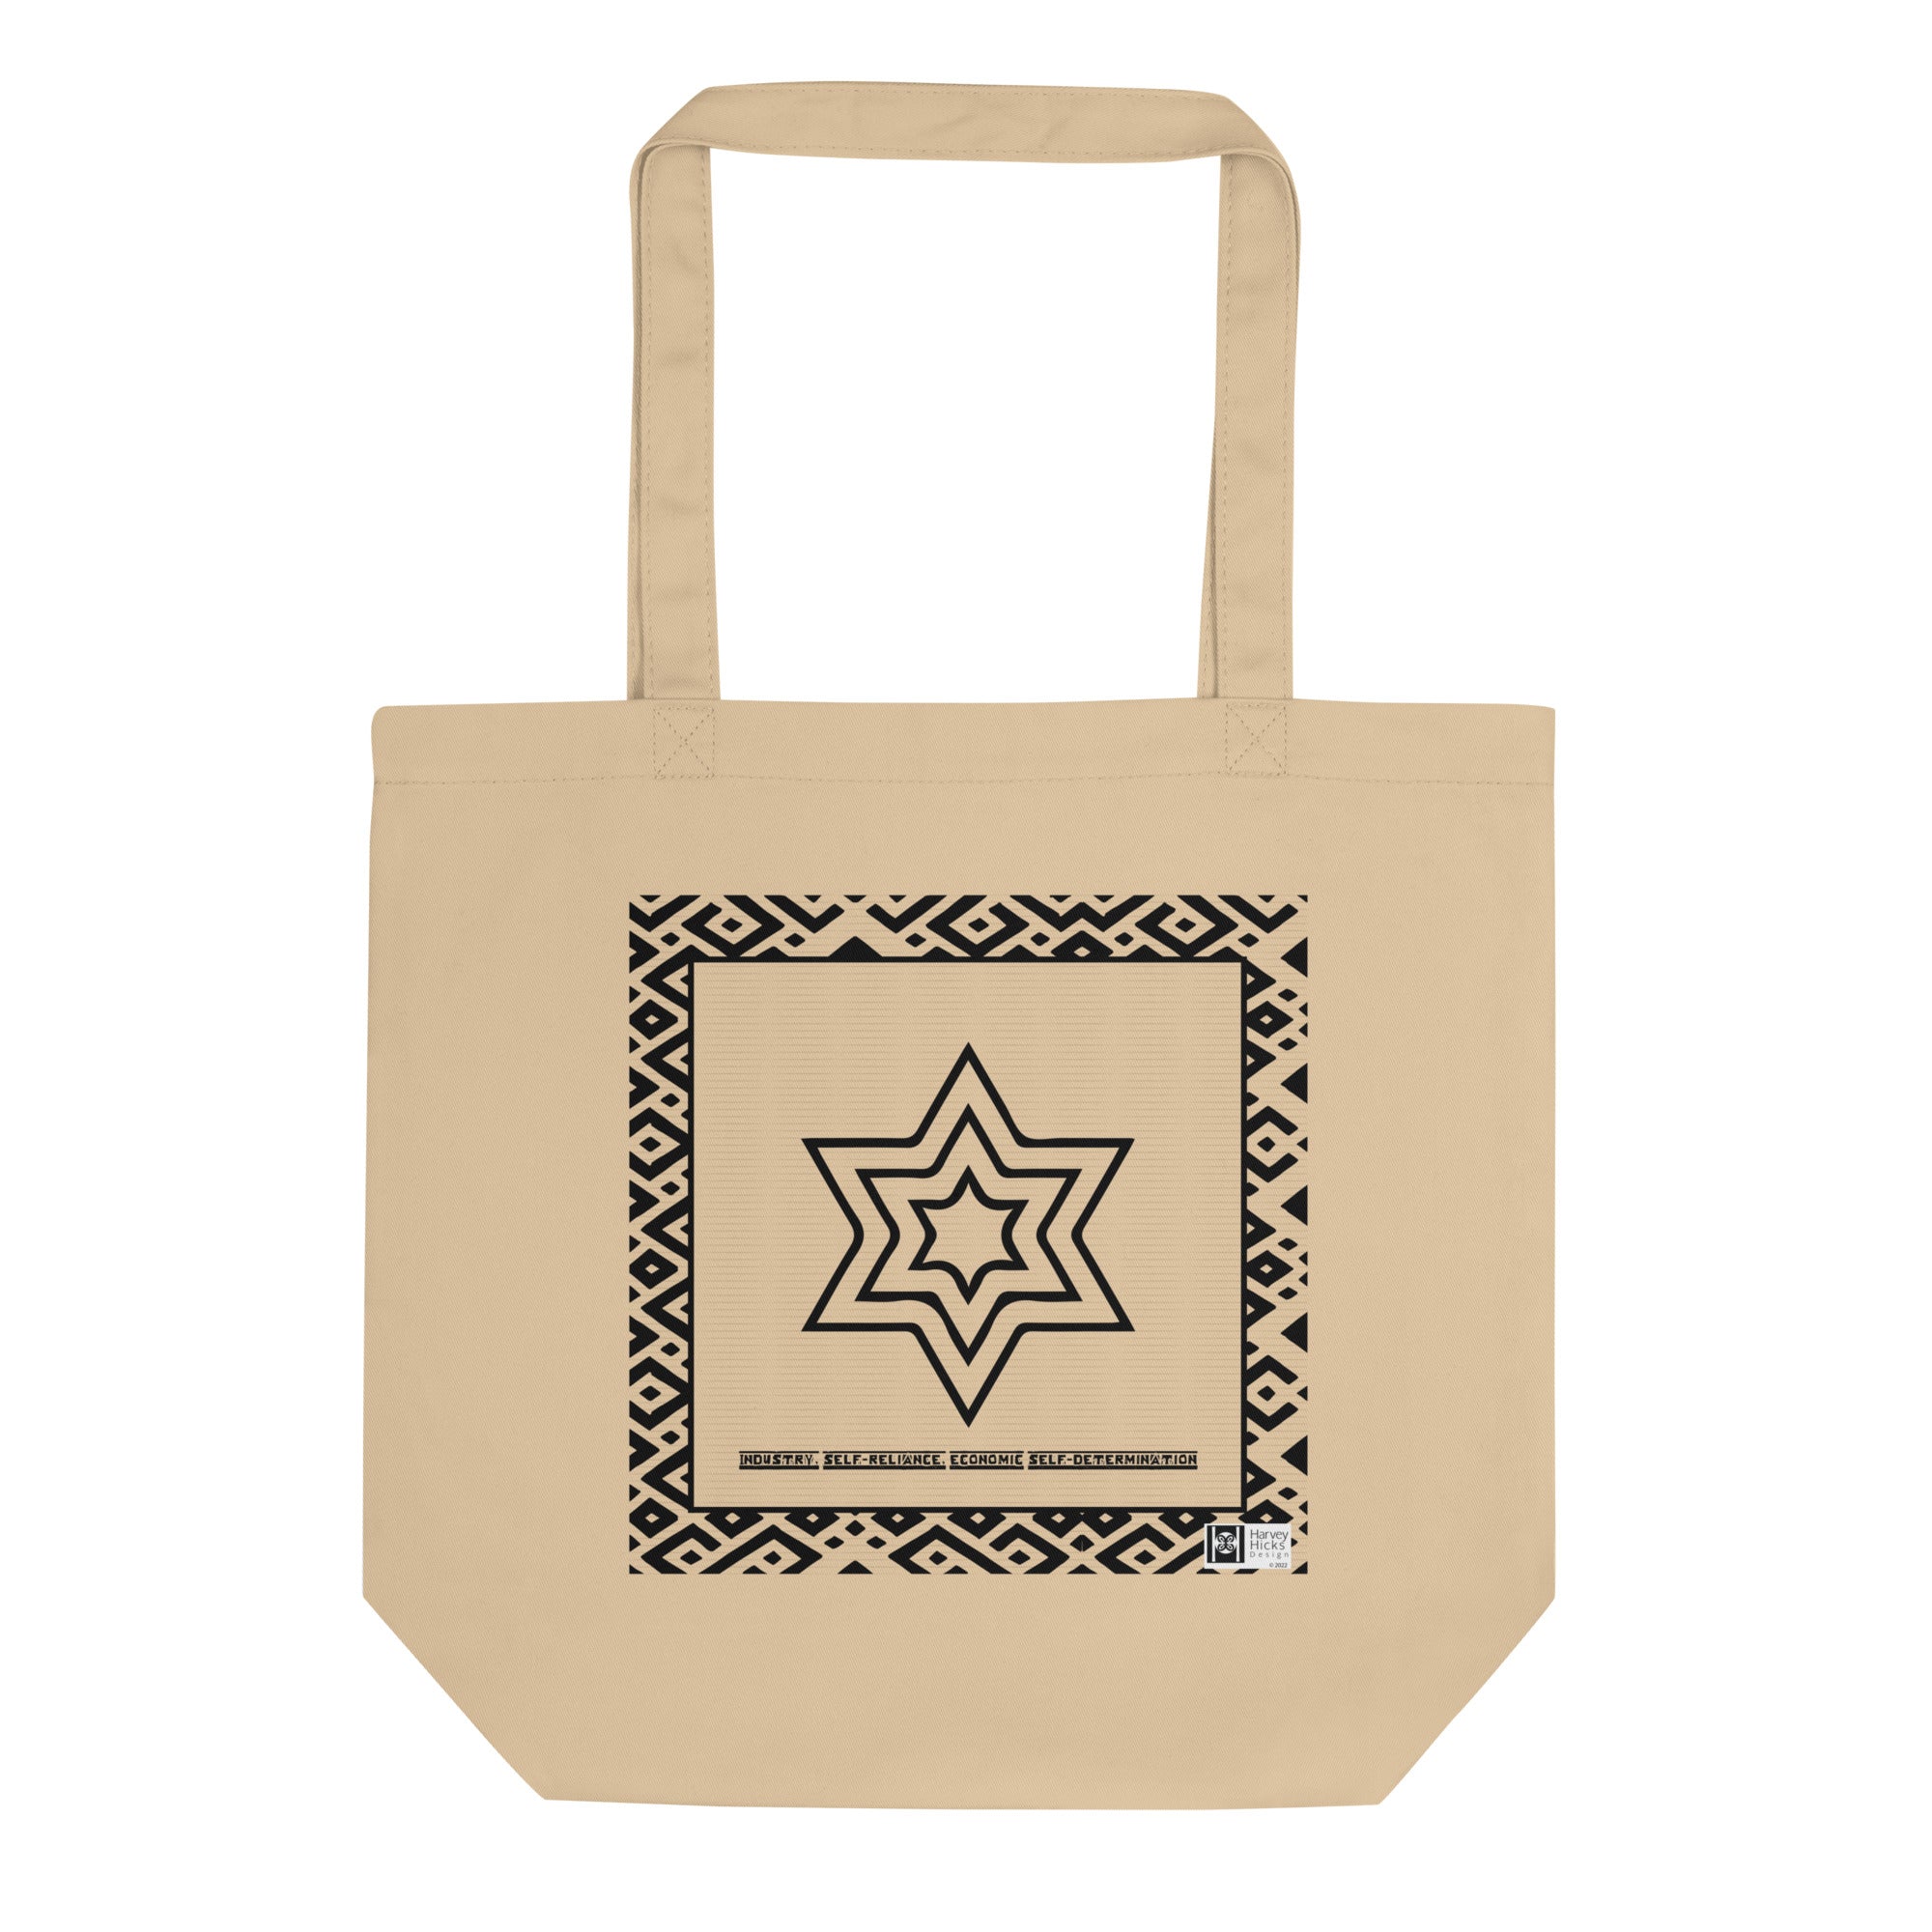 100% cotton Eco Tote Bag, featuring the Adinkra symbol for industry